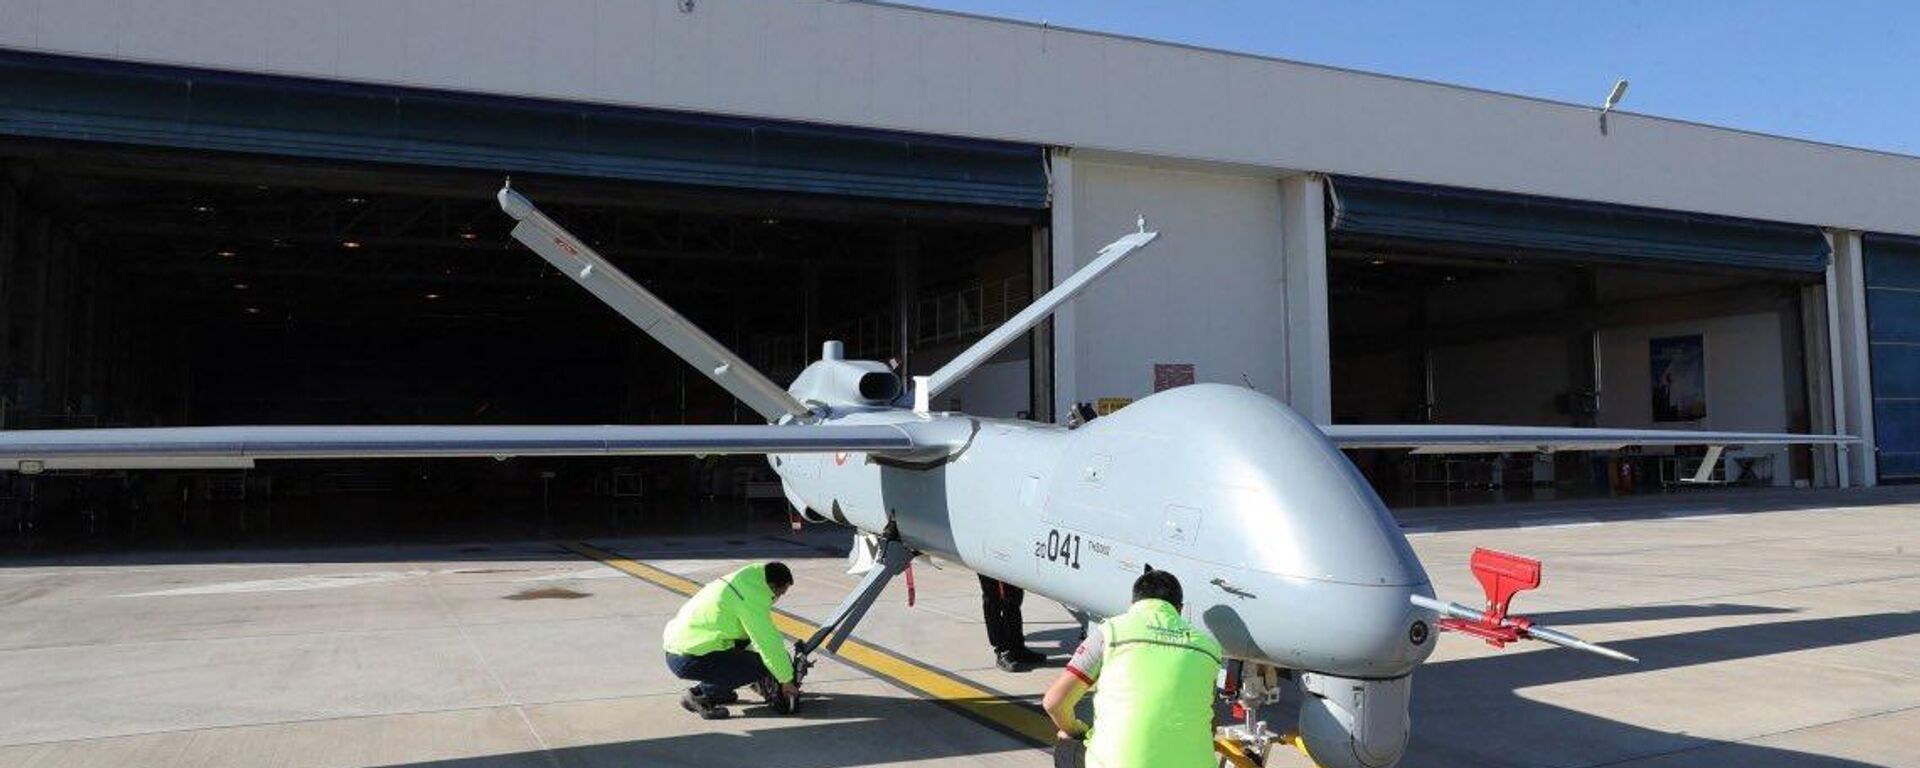 Maldives Constructing a 'Base' to Operate Turkish Military Drones: Report - Sputnik India, 1920, 10.03.2024